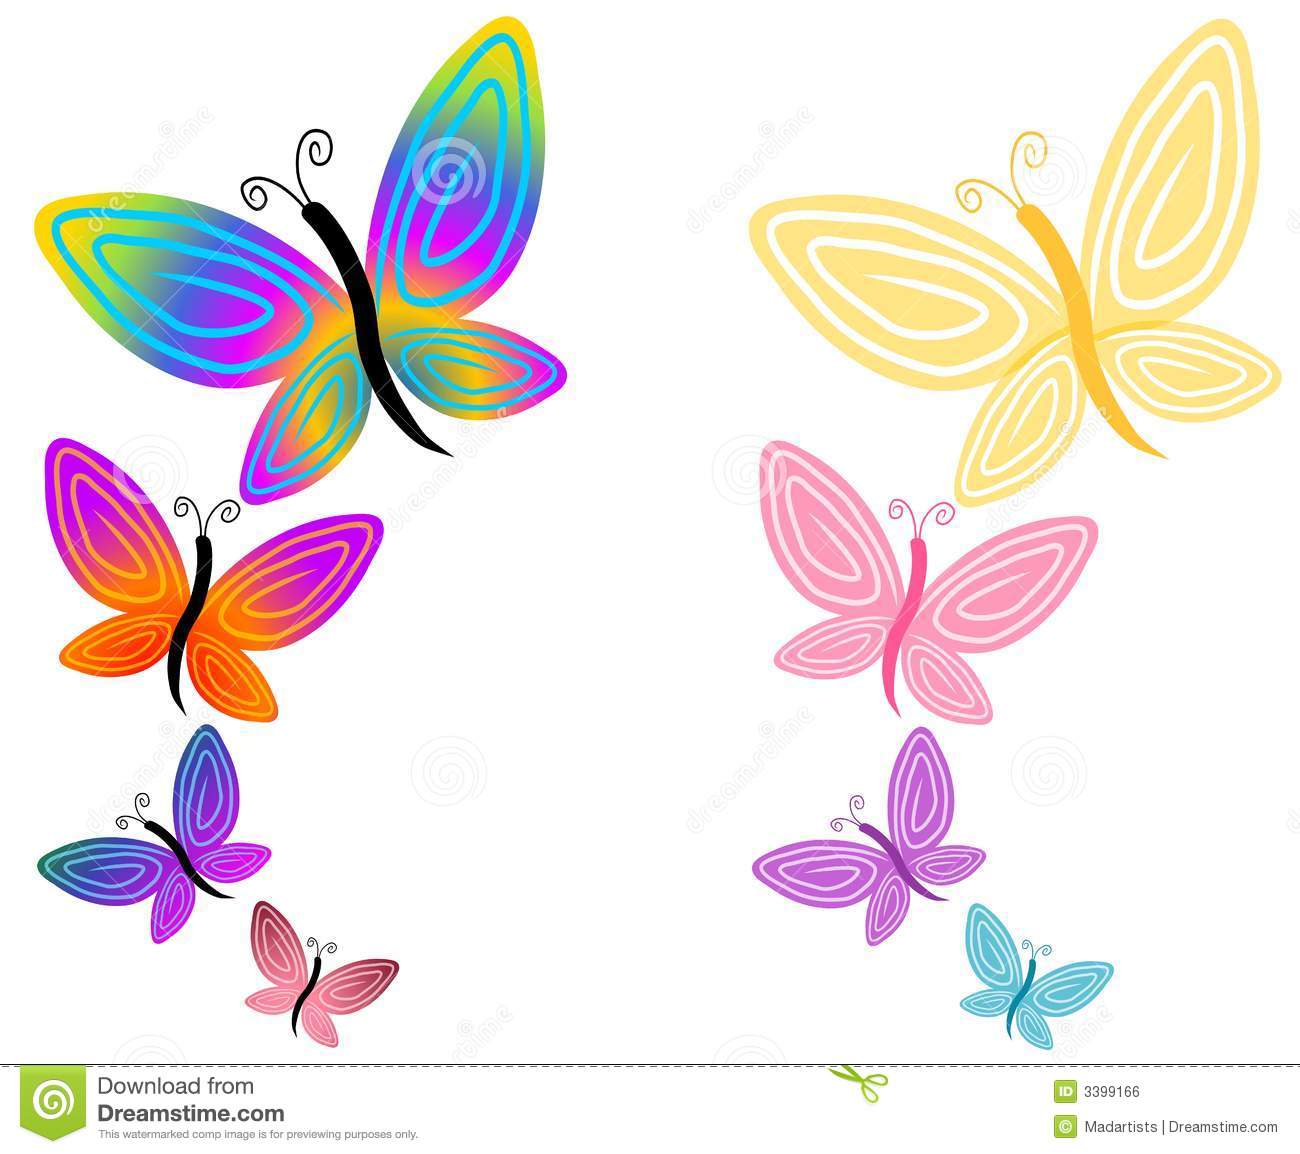 Butterfly Flowers Clip Art 01 Royalty Free Stock Image.